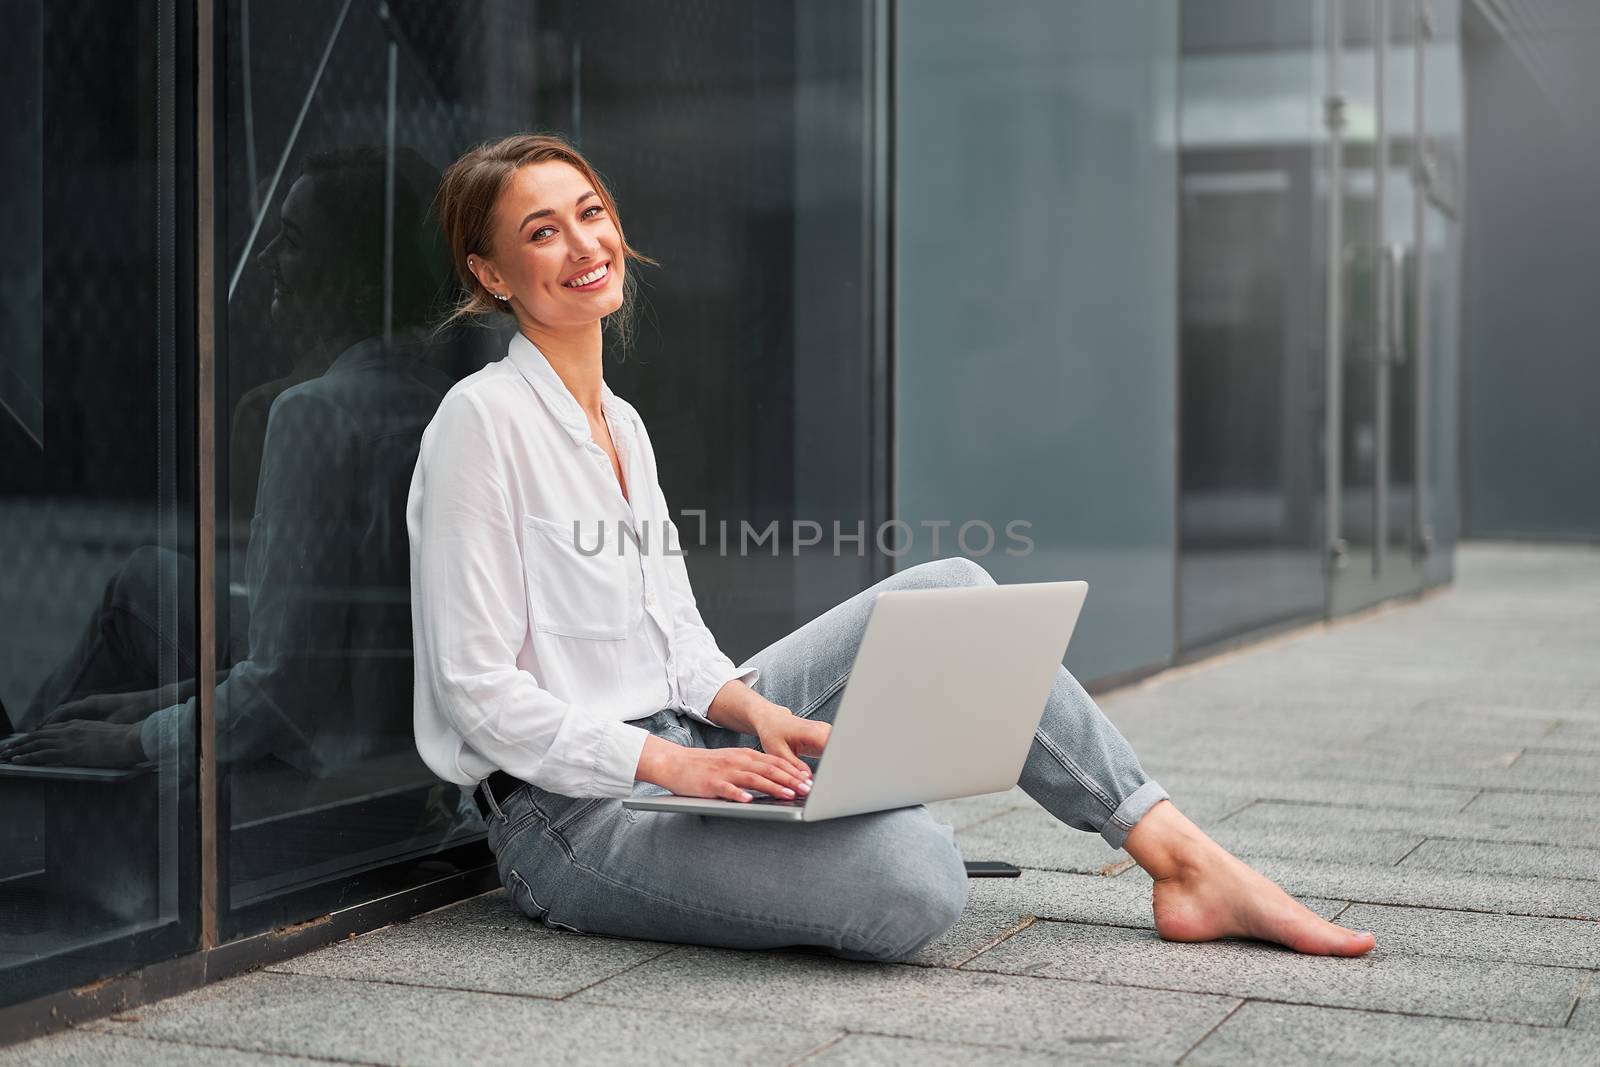 Businesswoman successful woman business person outdoor corporate building exterior with laptop Pensive elegance cute caucasian professional business woman middle age ecommerce deal Online banking